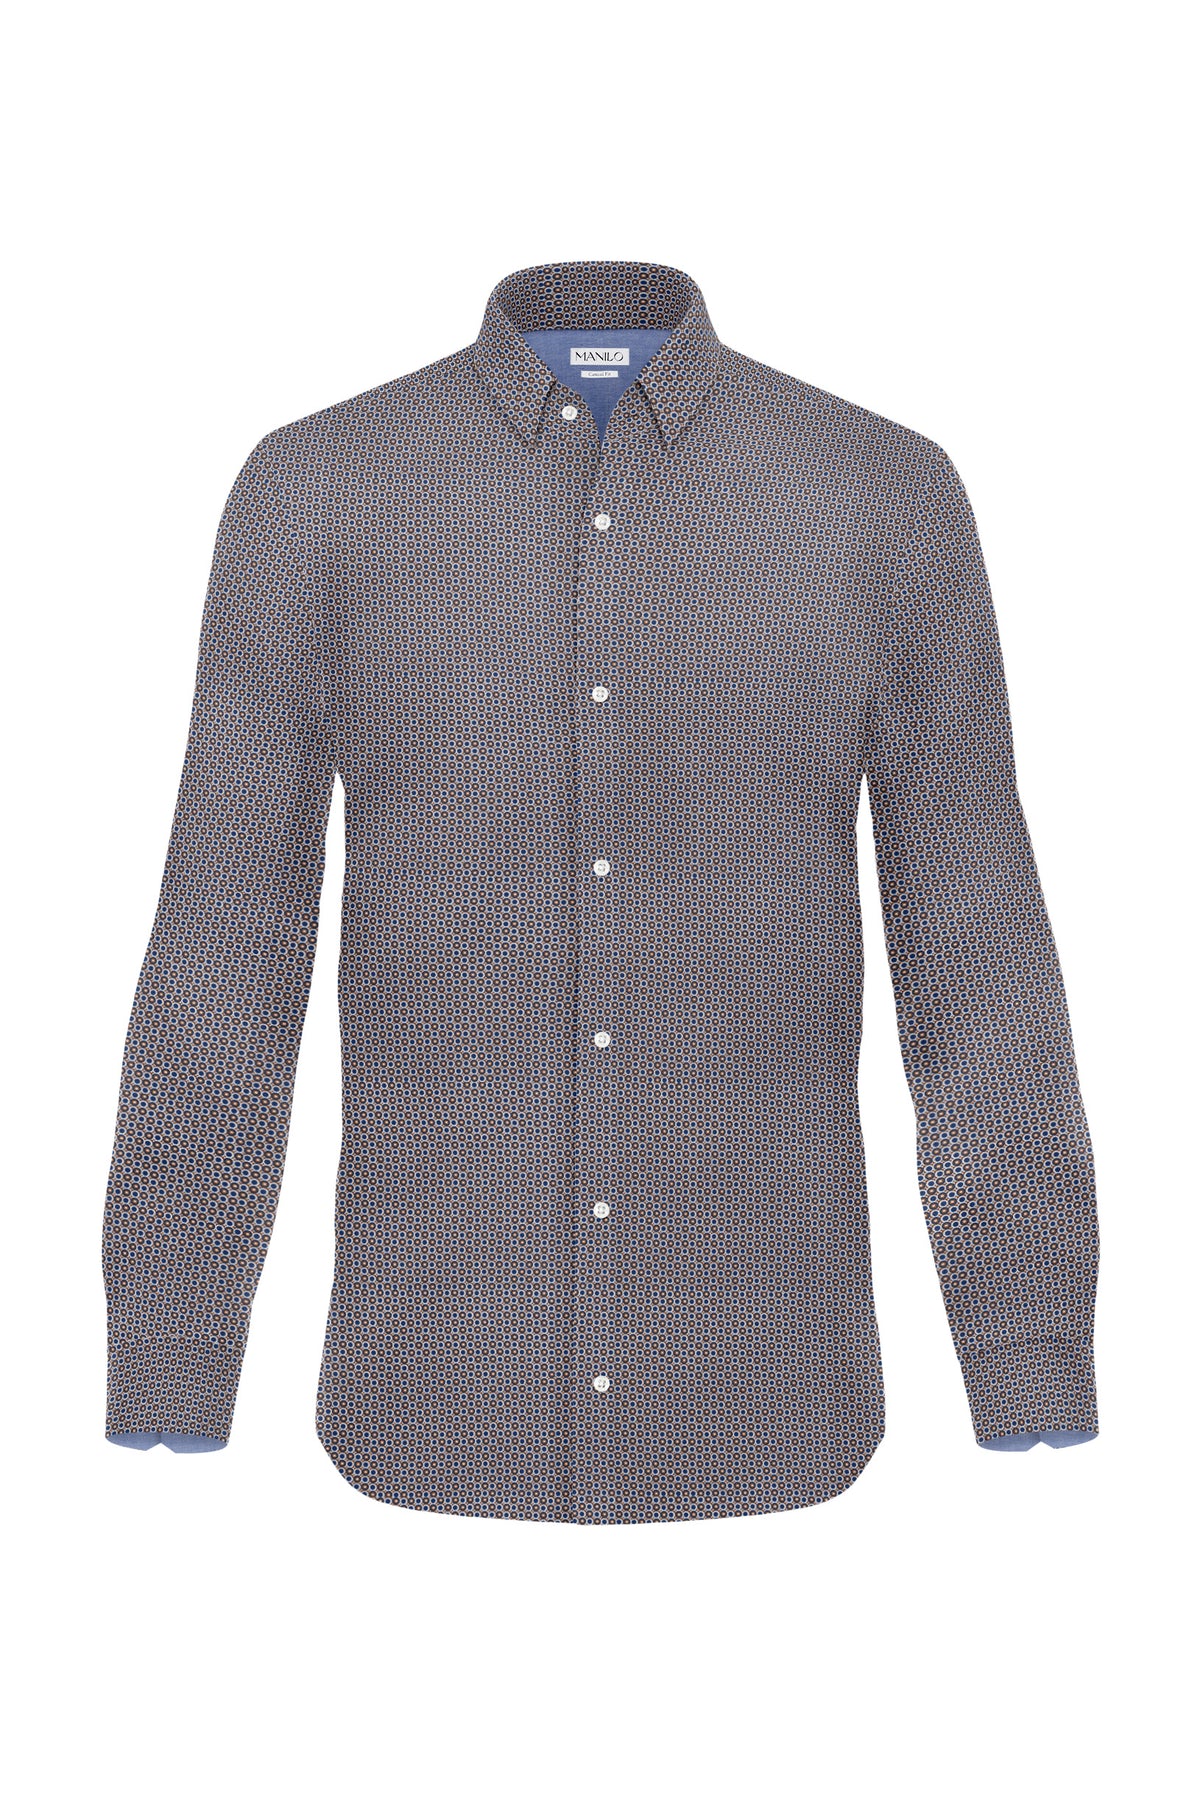 Casual shirt with graphic pattern in brown (Art. 2233-C)